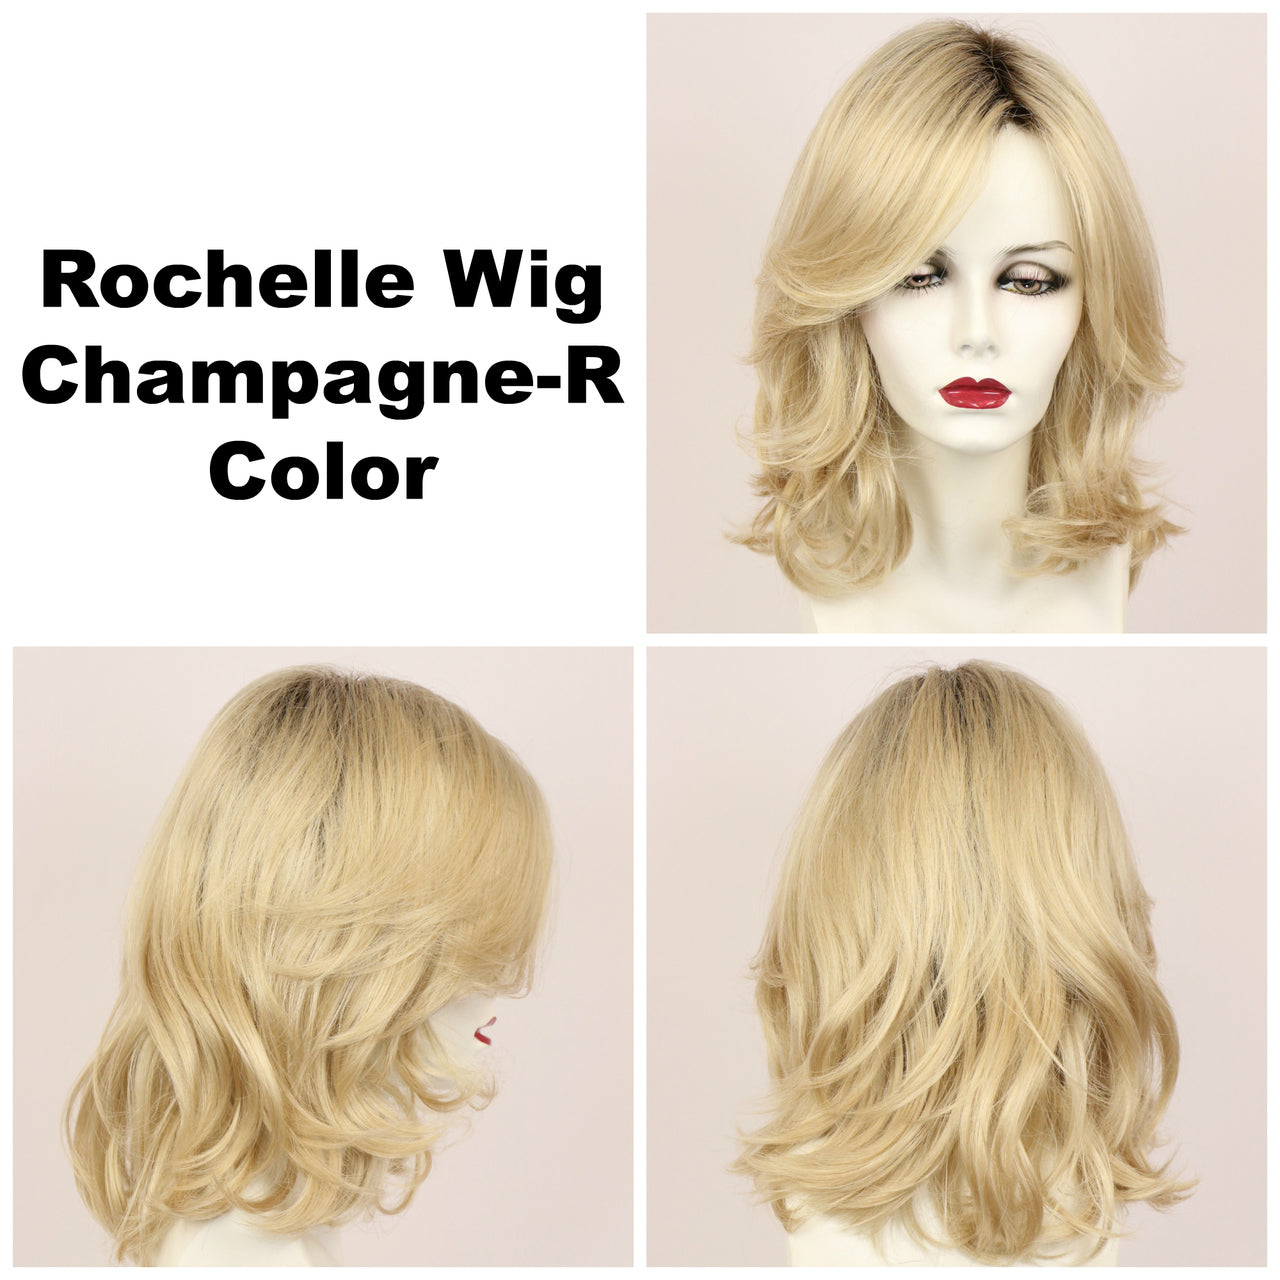 Champagne-R / Rochelle w/ Roots / Long Wig